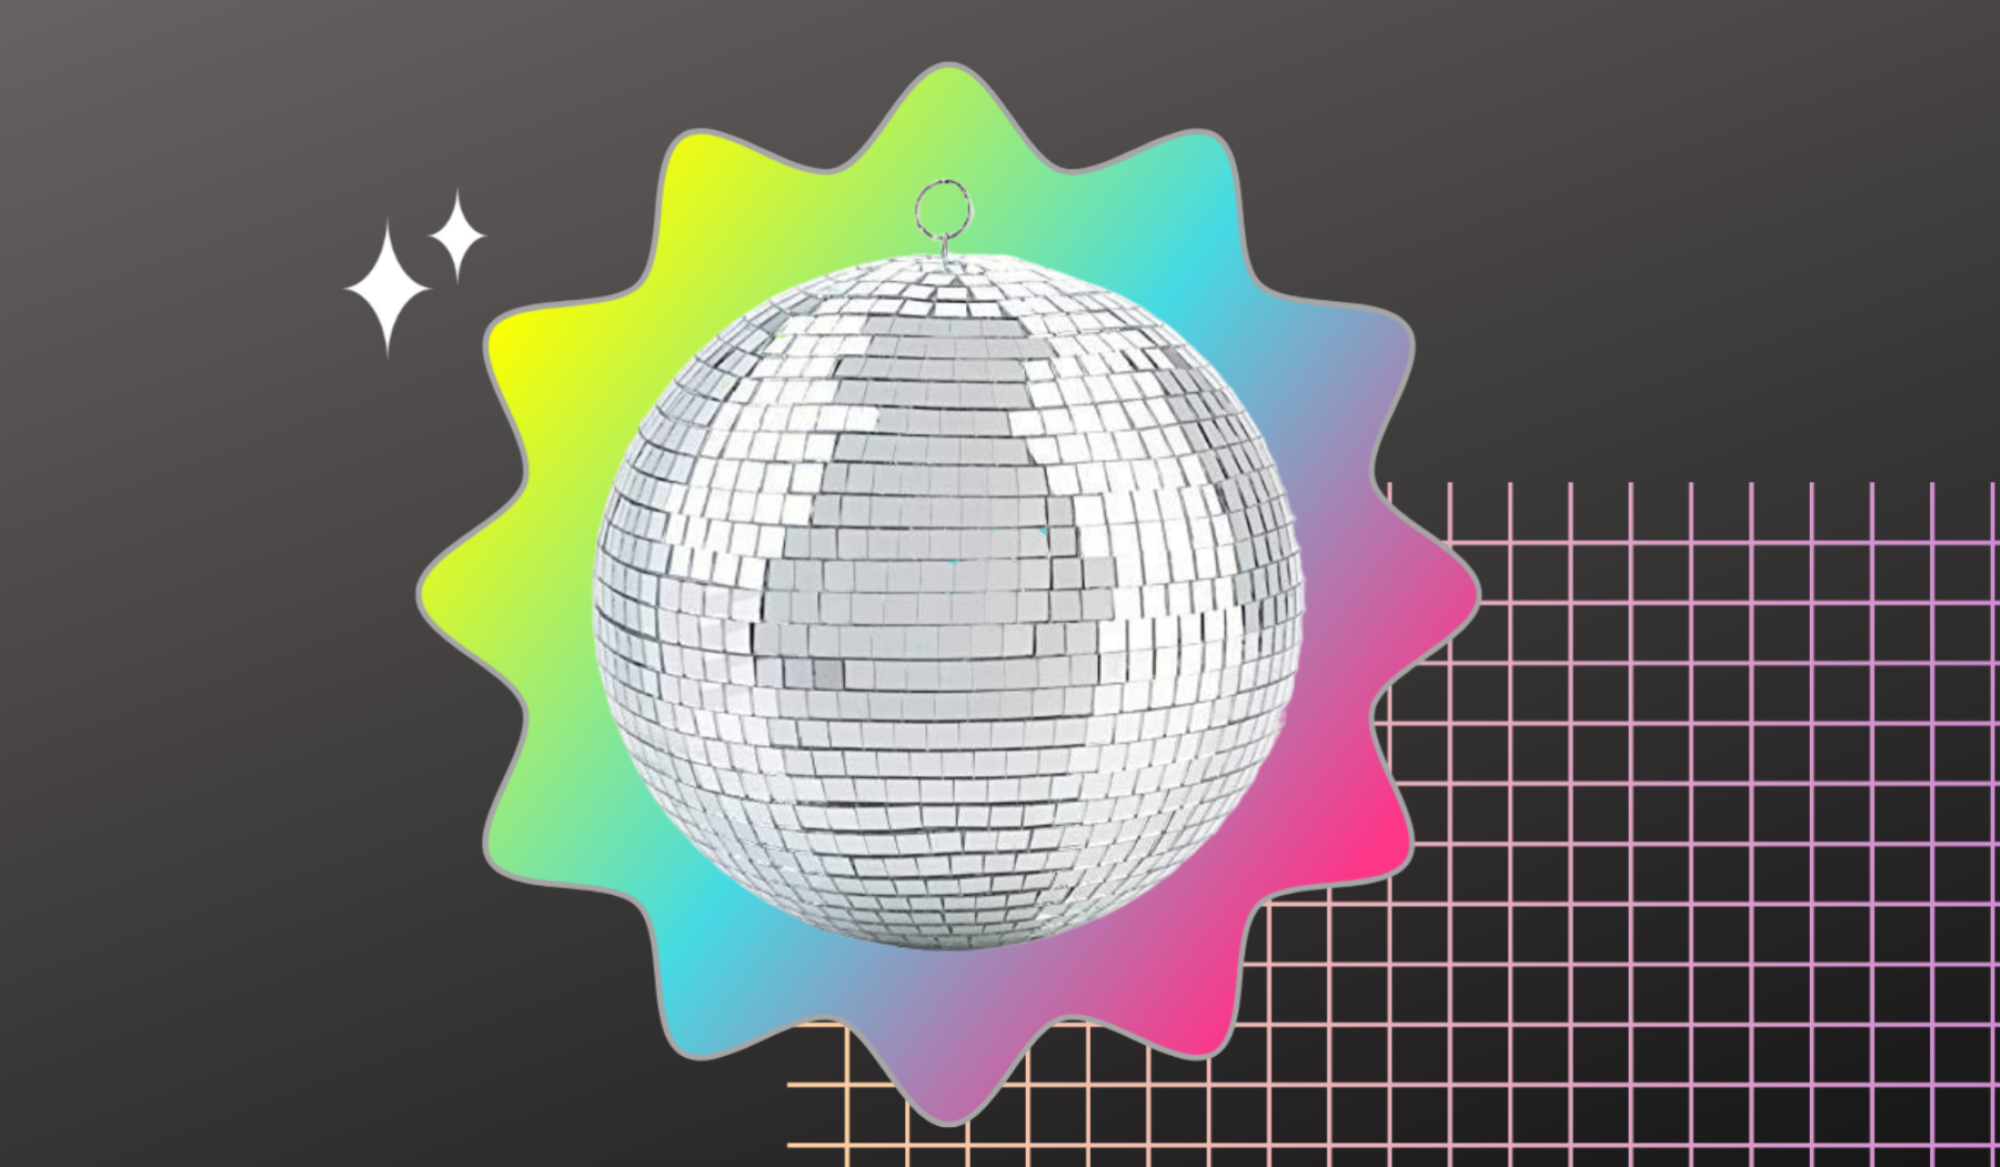 Disco ball on gray graphic with colorful shapes